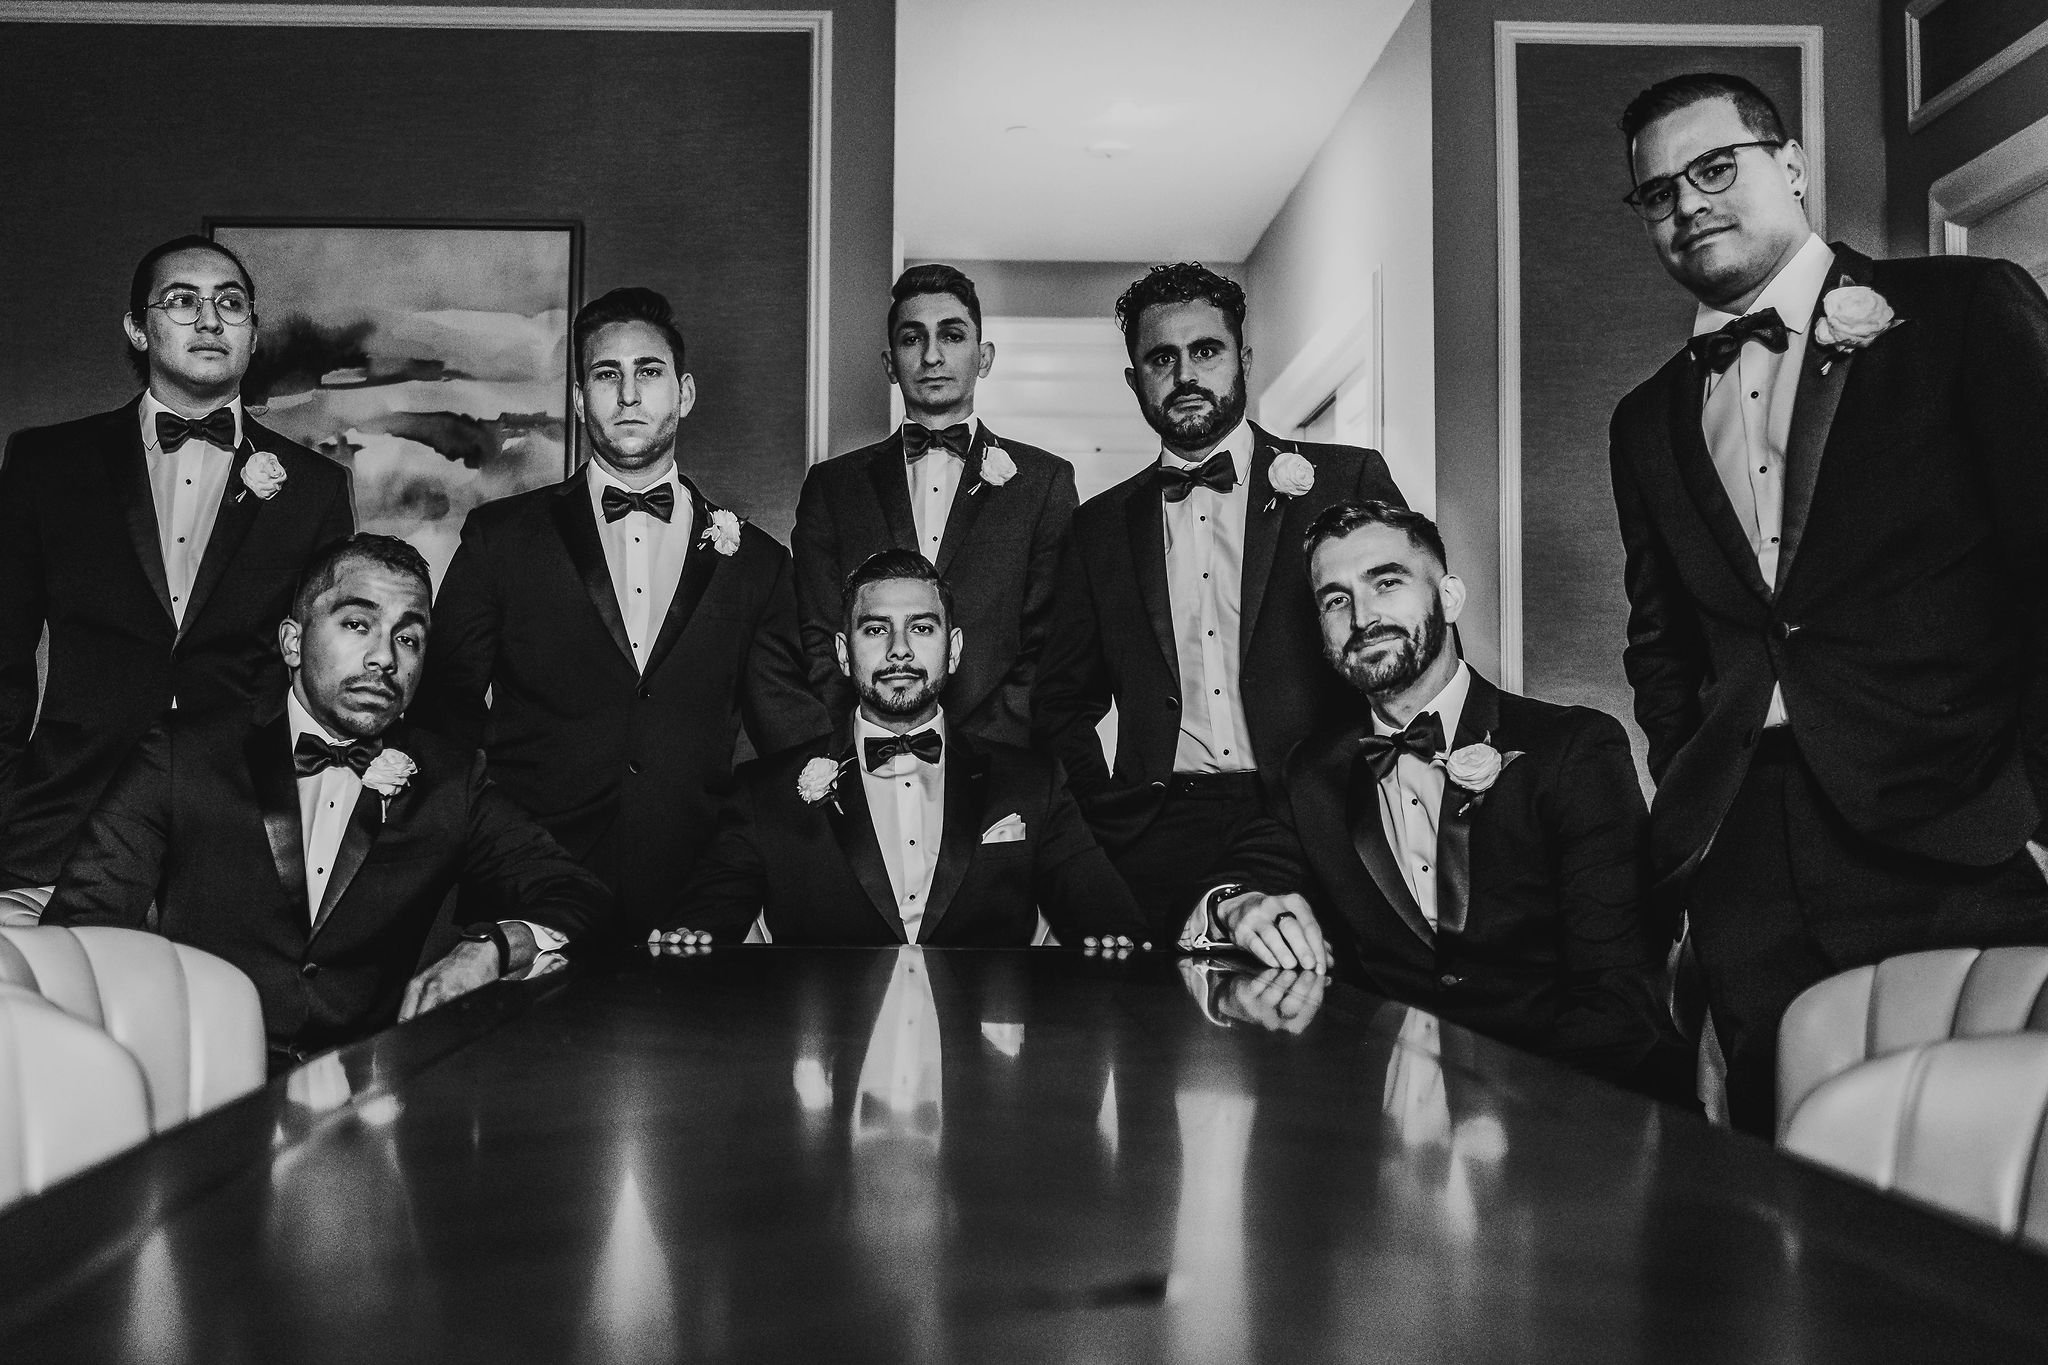 wedding party photograph of groomsmen at the chateau Laurier in ottawa